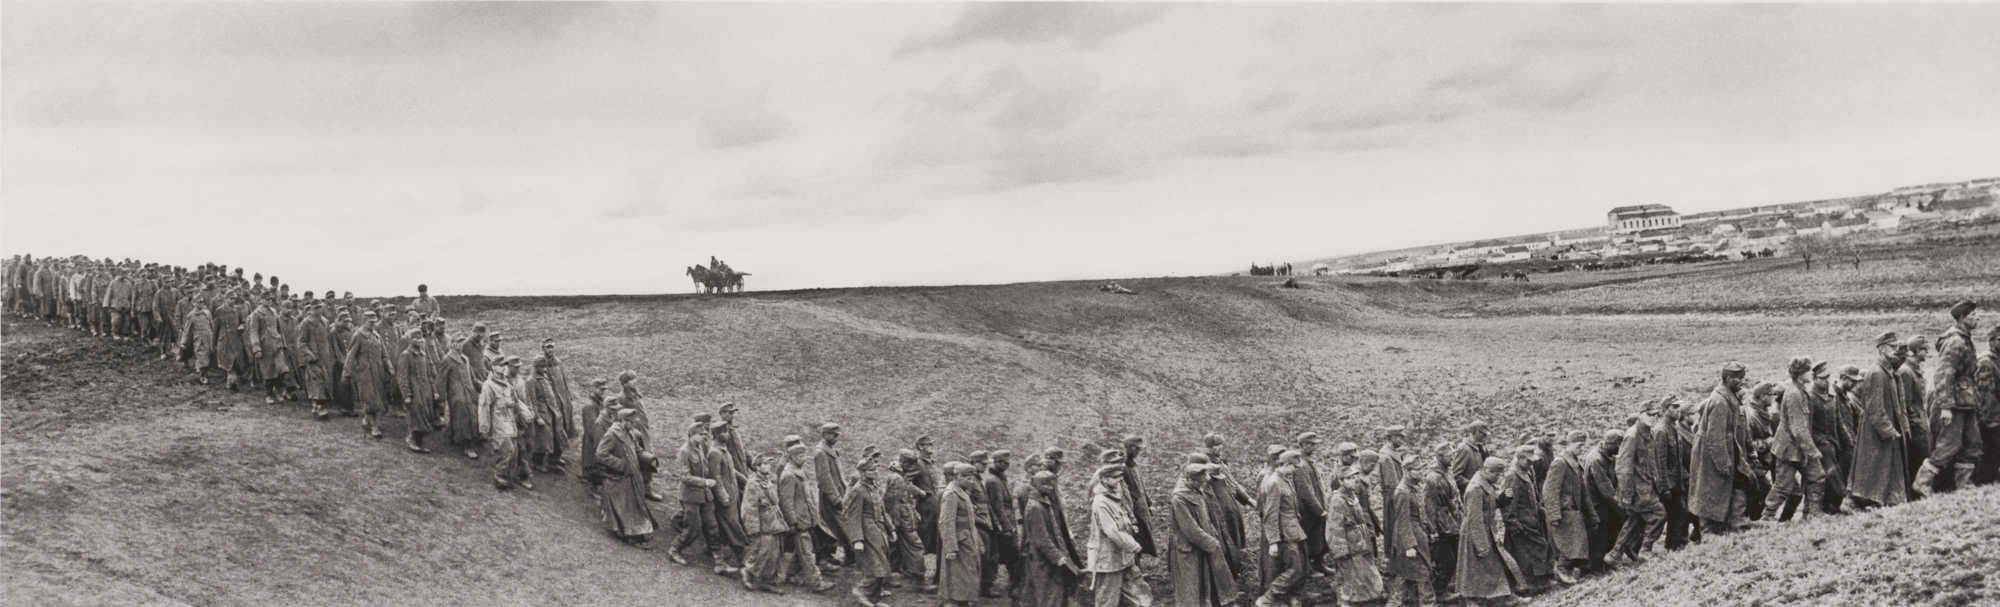   The March of the German POWs, 1942  Dmitri Baltermants